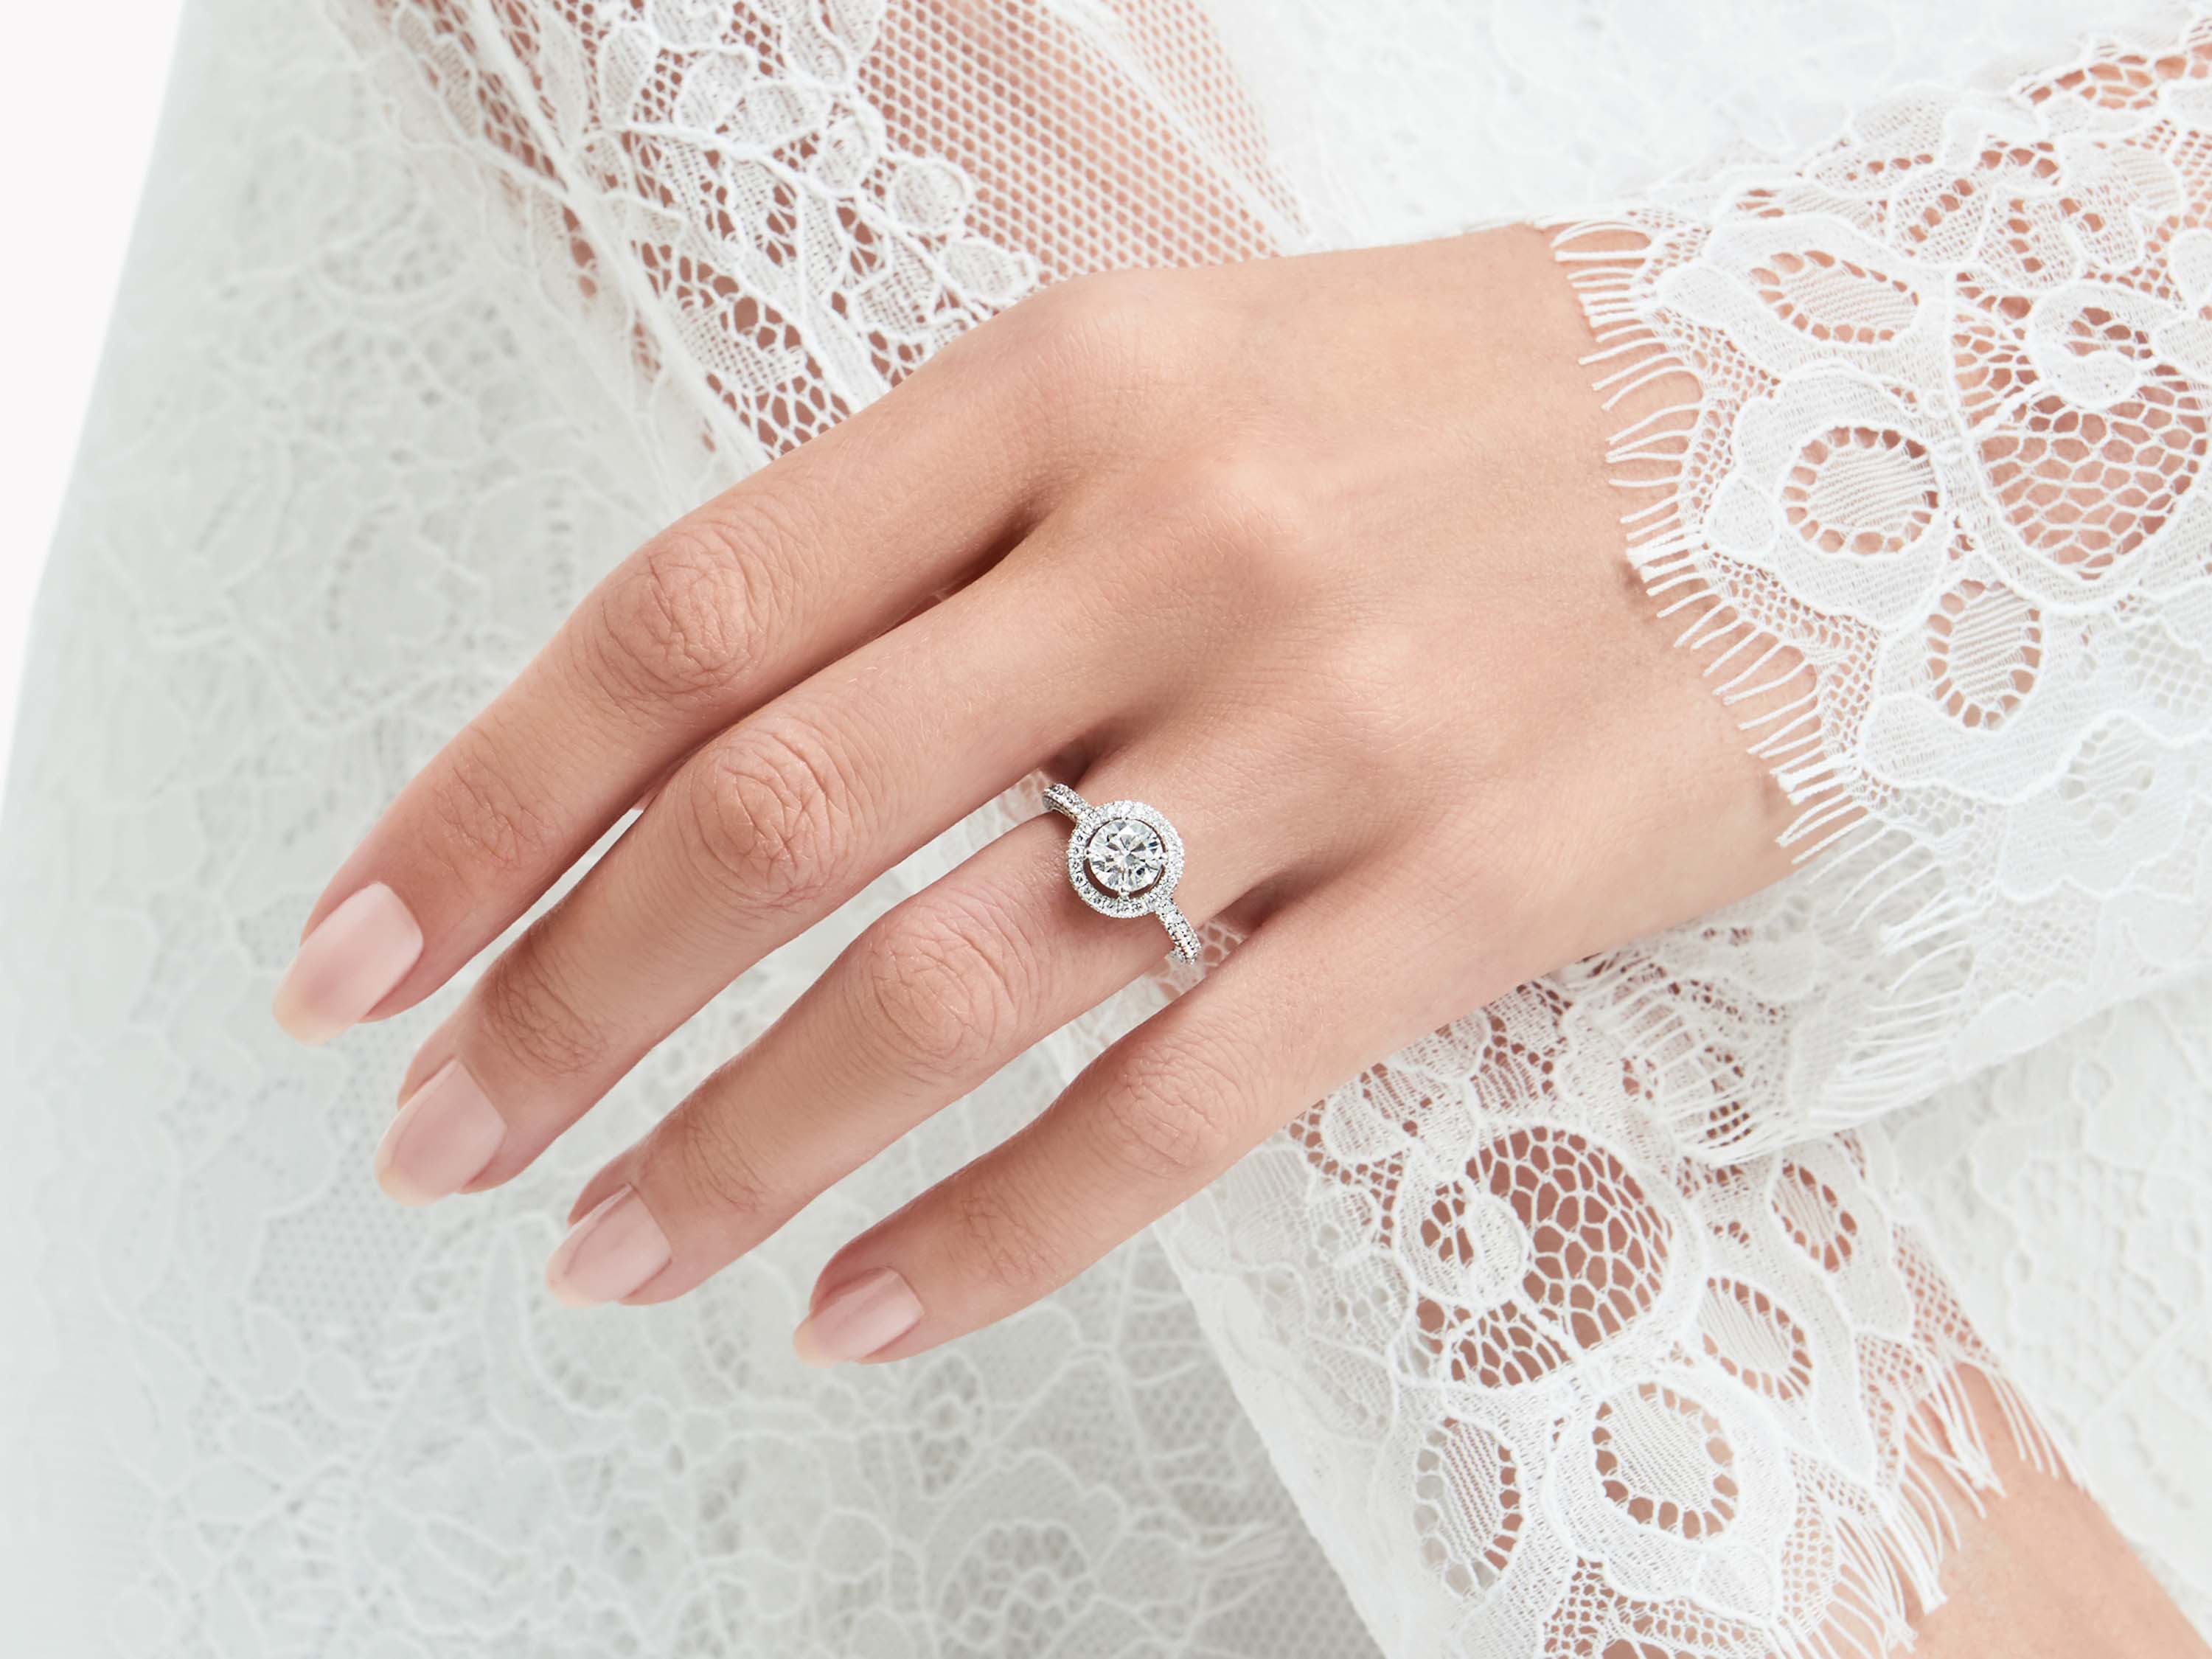 Model wears Constellation Round Diamond Engagement Ring from the Graff bridal jewellery collection